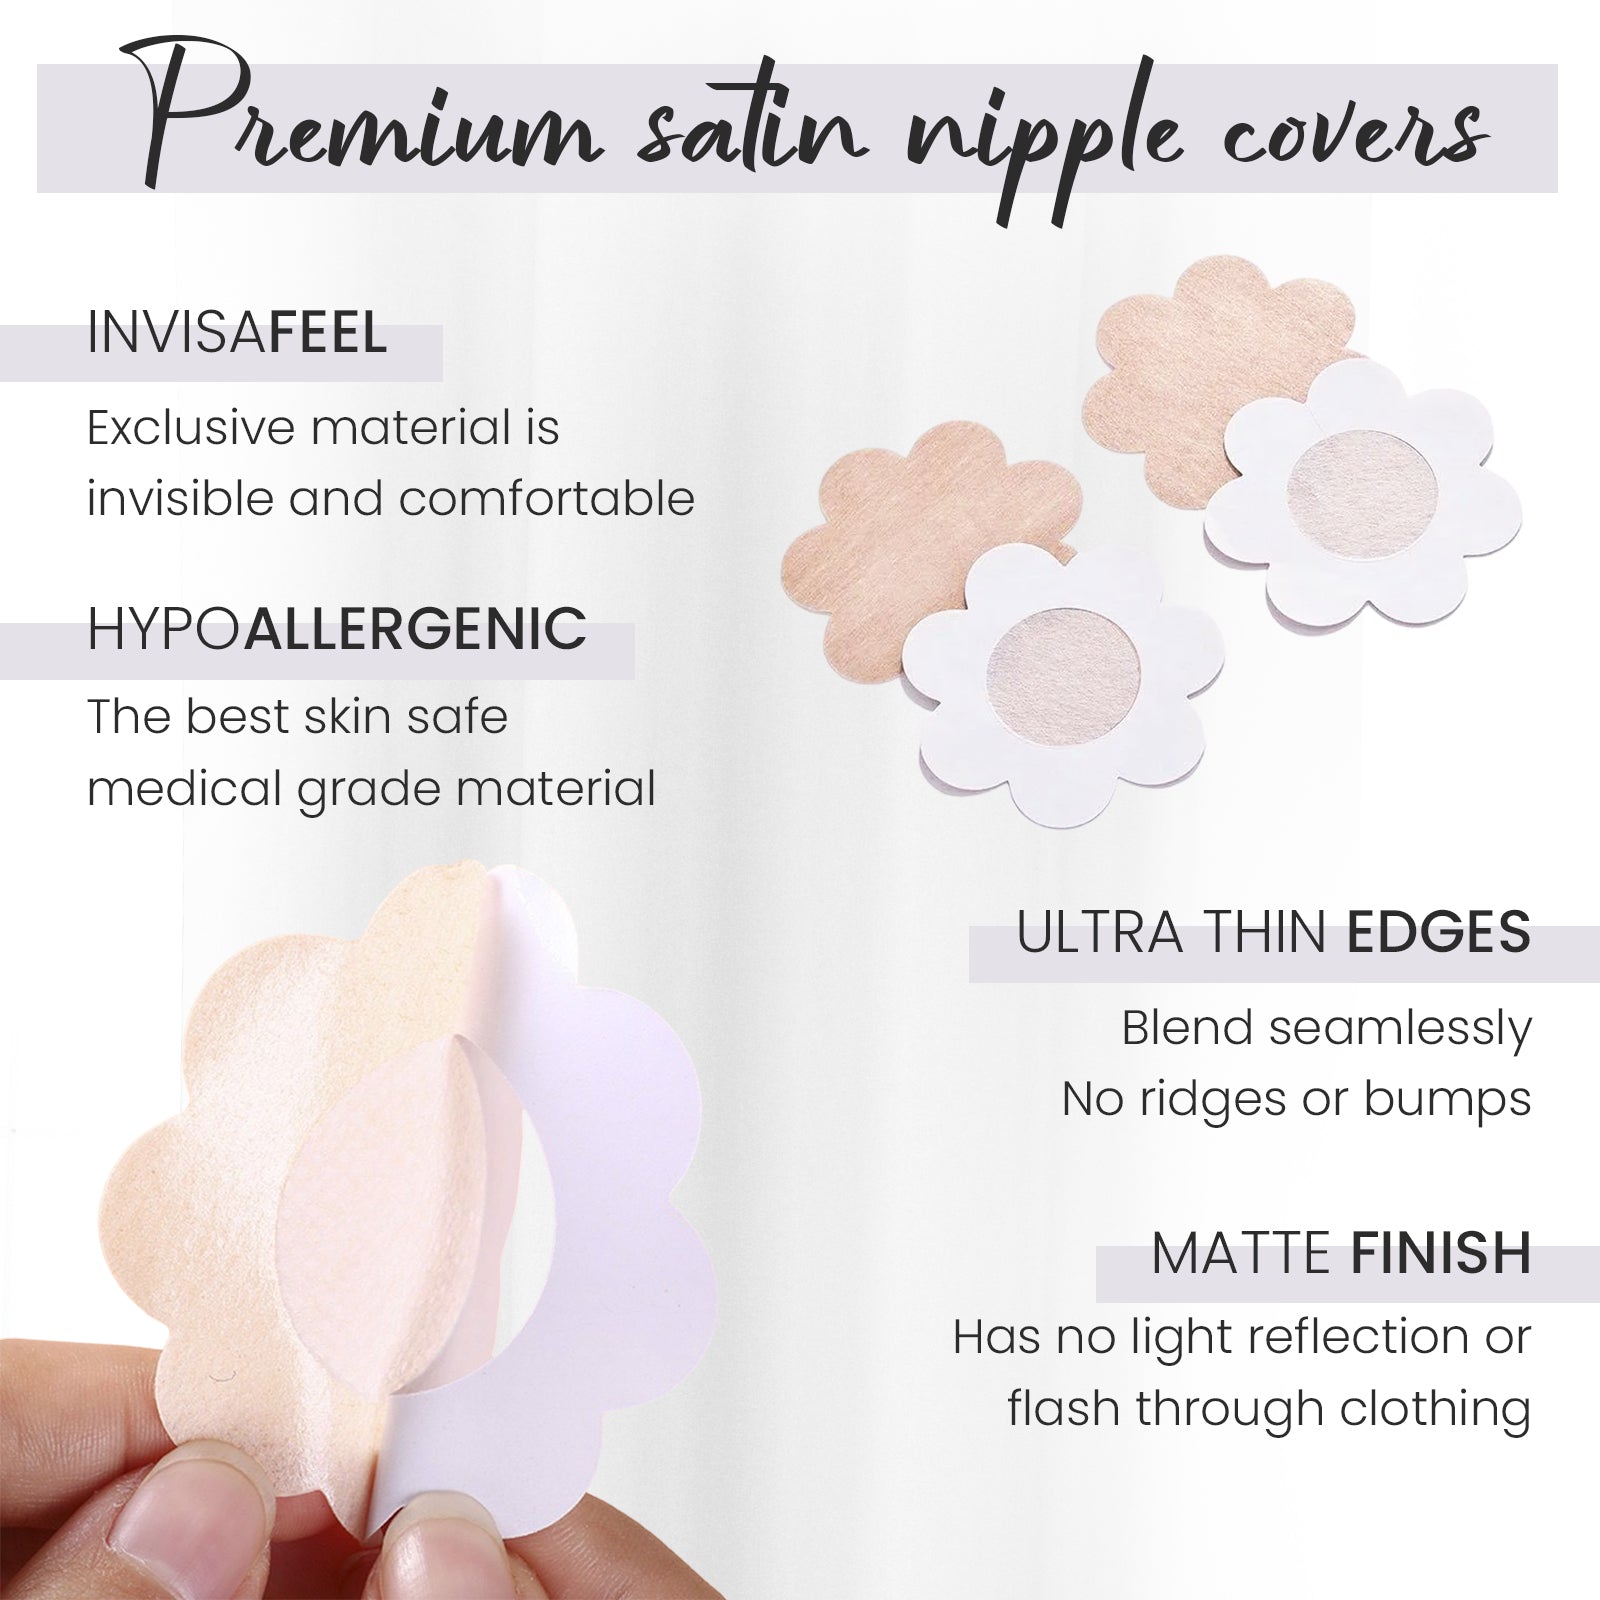 nipple covers sticky; nippies; pasties; cakes body nipple cover; nipple covers stickers; nipple pasties; nipple coverings; nipple pasties pack; petals breast pasties; niple cover for women; pasty nipple covers; nipple stickies; seamless cake cover; cake nipple covers; nip covers; nipples covers